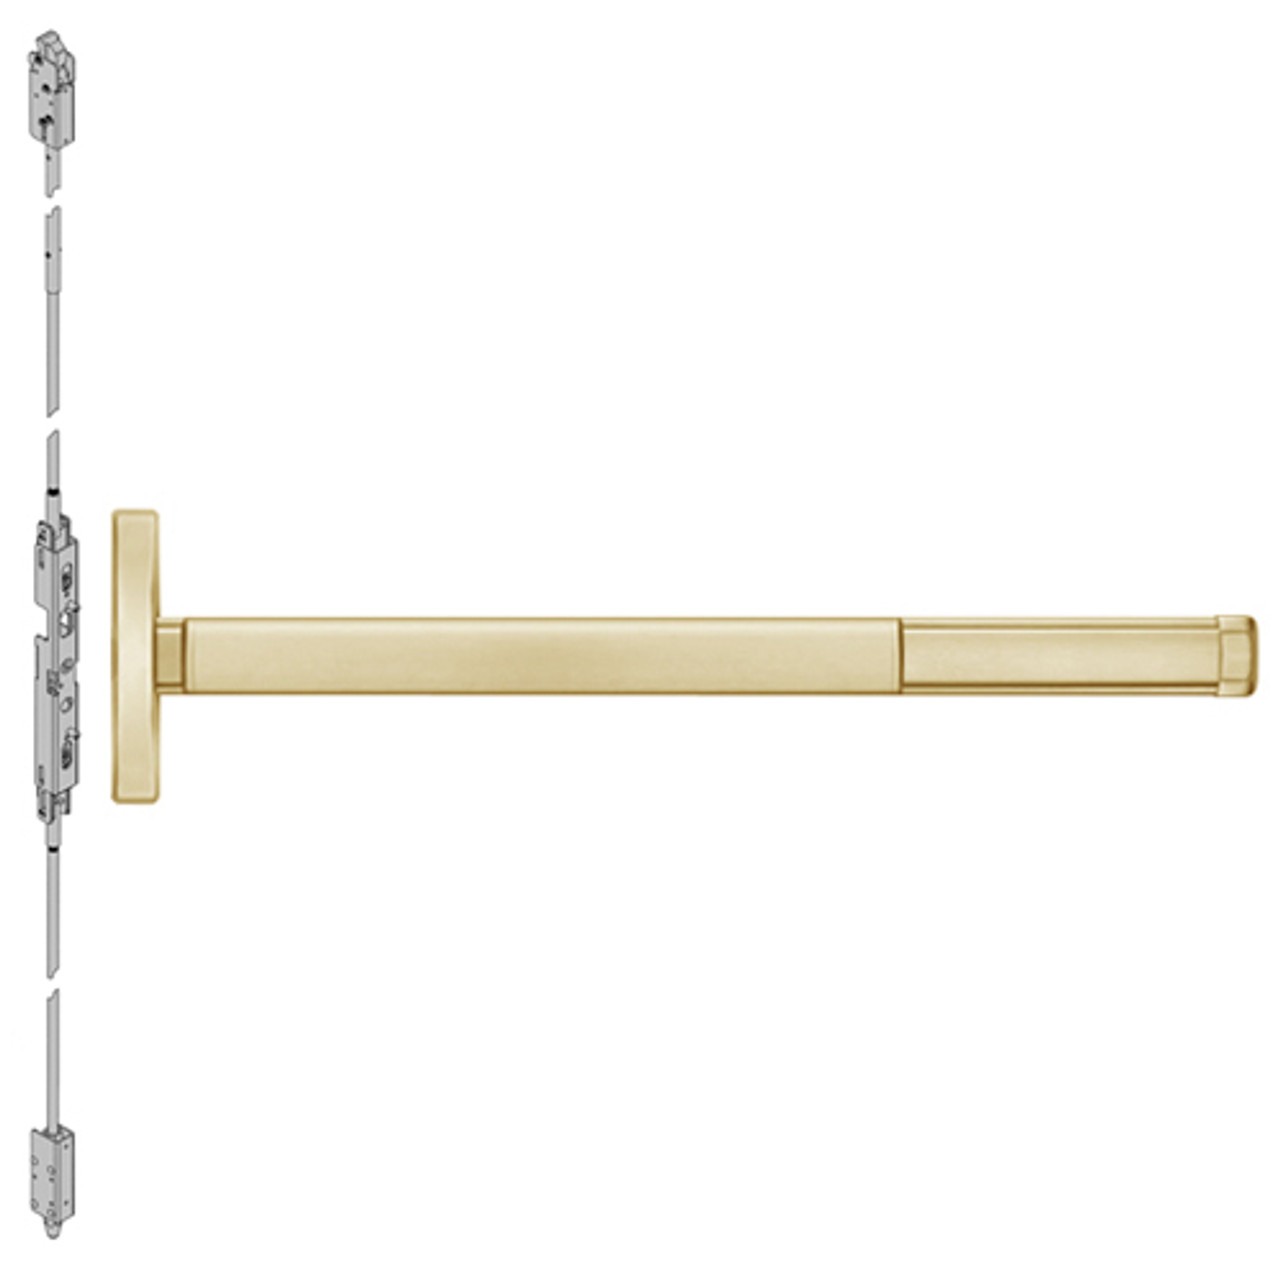 DE2603LBR-606-48 PHI 2600 Series Concealed Vertical Rod Exit Device with Delayed Egress Prepped for Key Retracts Latchbolt in Satin Brass Finish